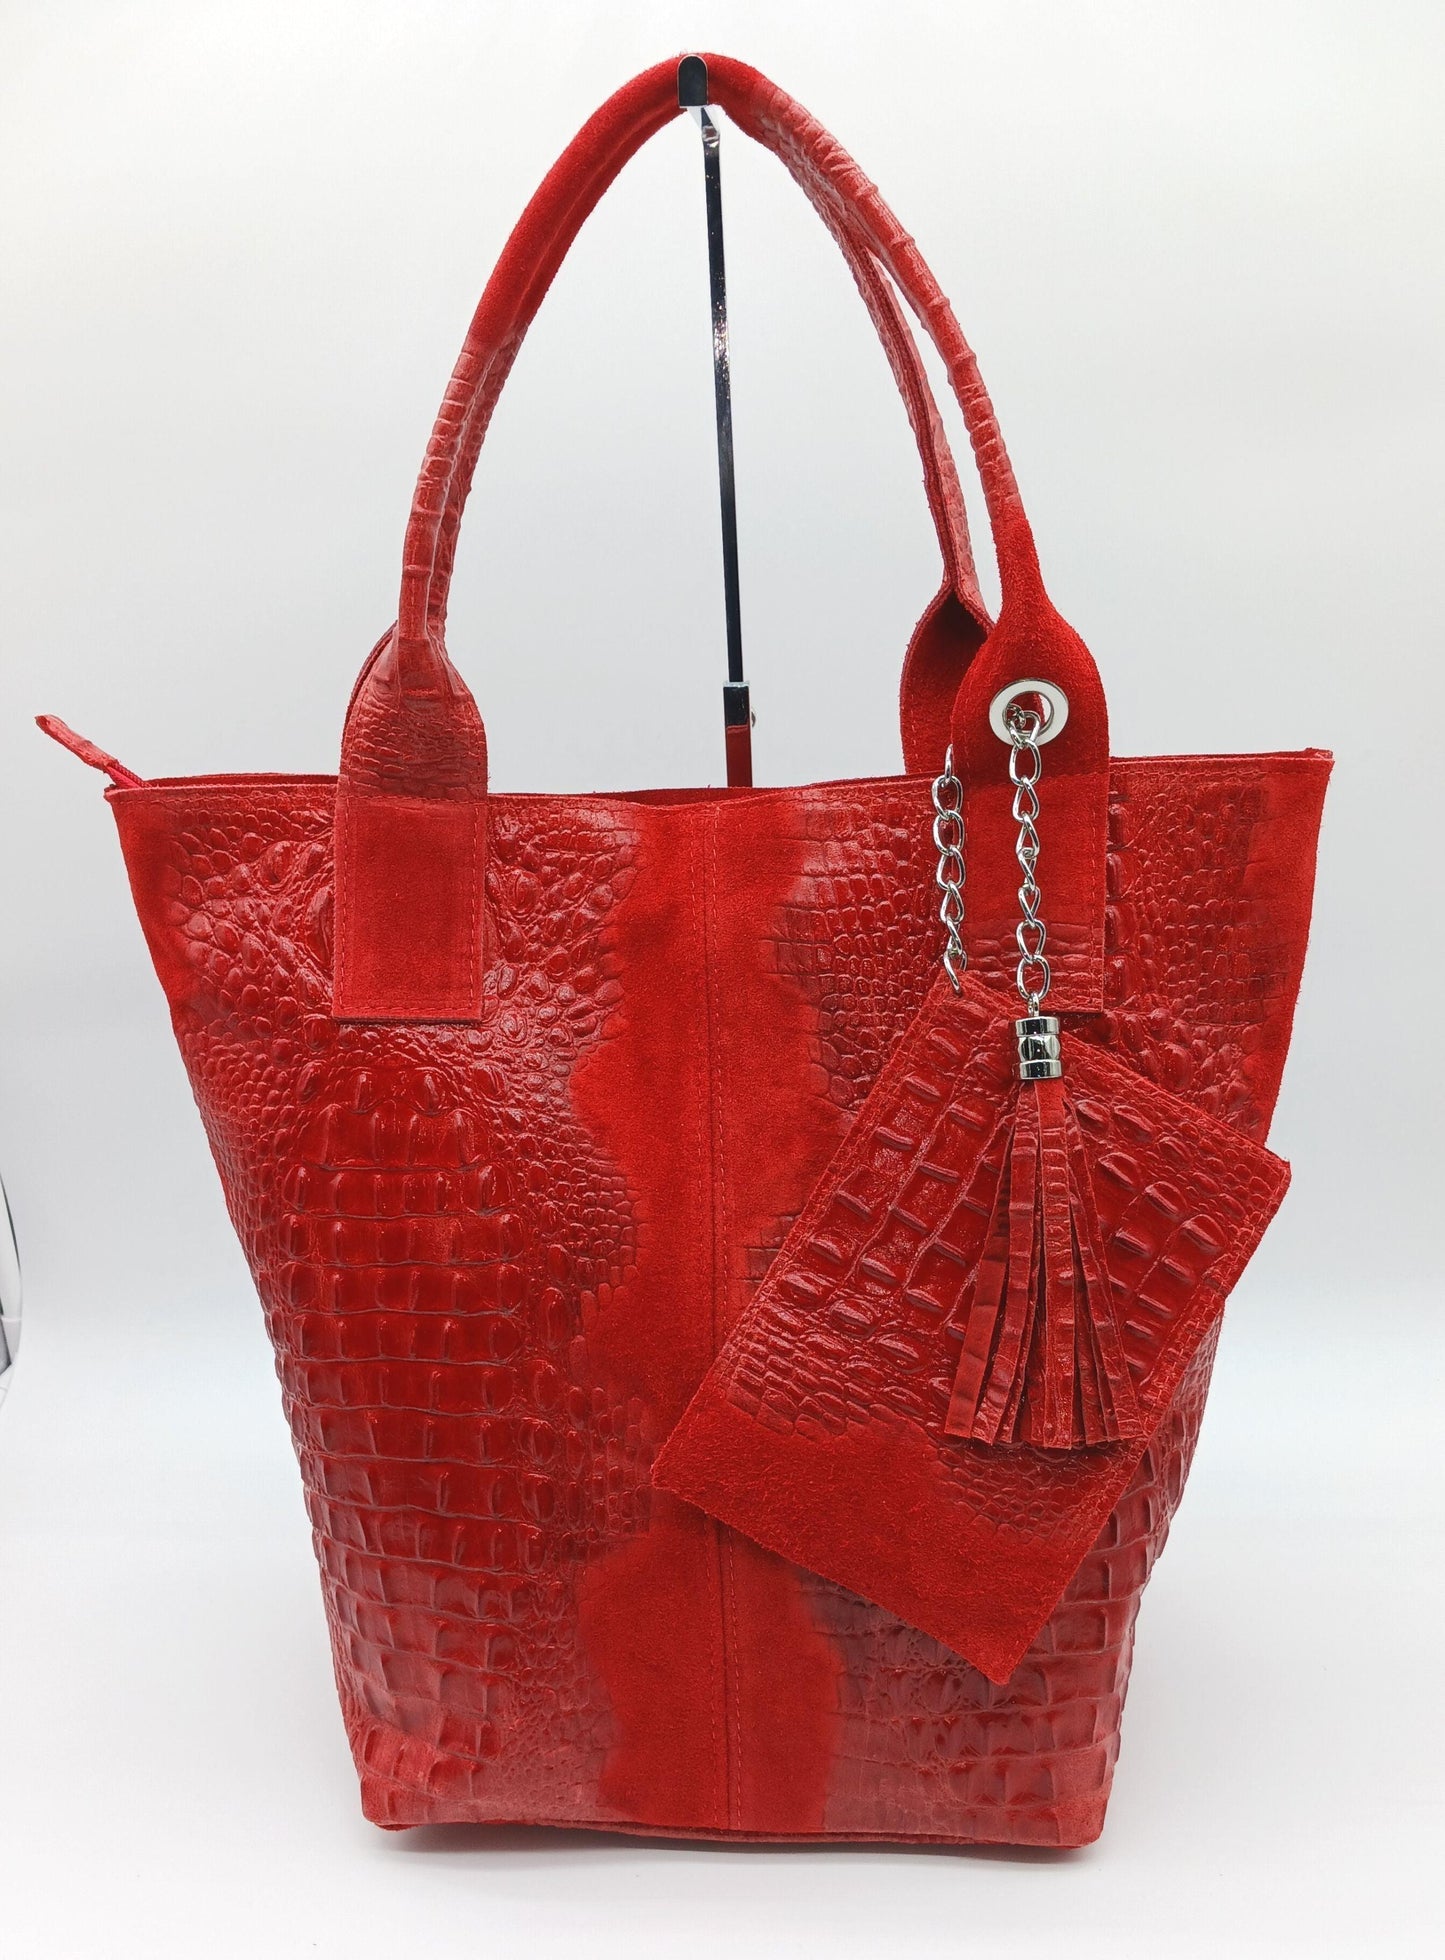 Borse in Pelle made in Italy Red leather handbag